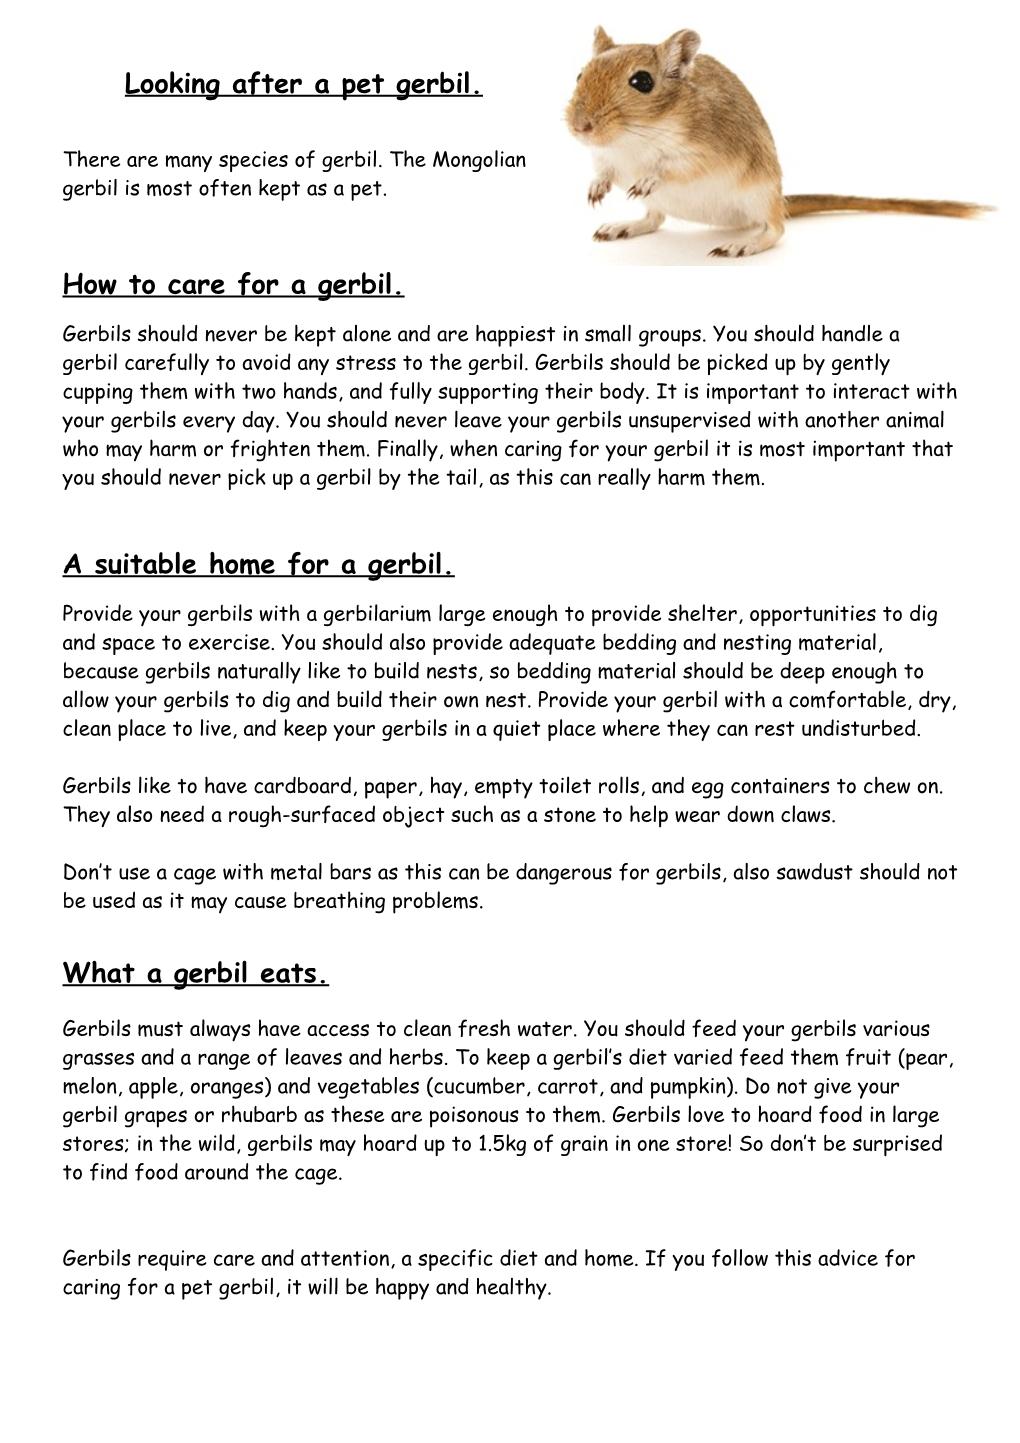 How to Care for a Gerbil